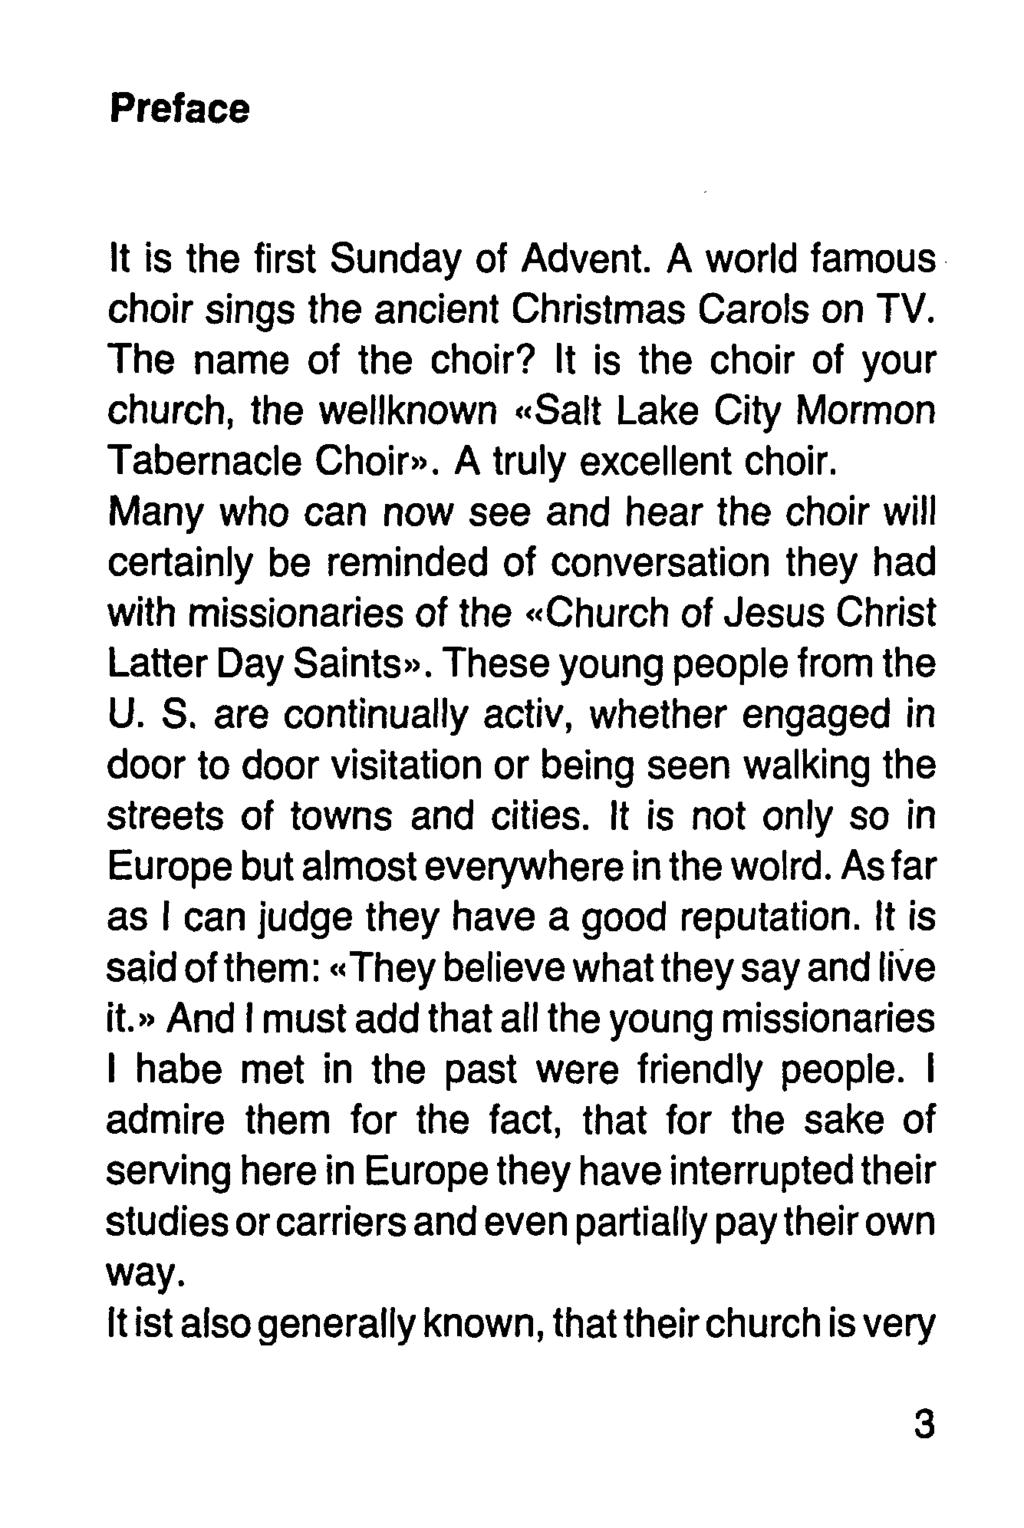 Preface It is the first Sunday of Advent. A world famous choir sings the ancient Christmas Carols on TV. The name of the choir?